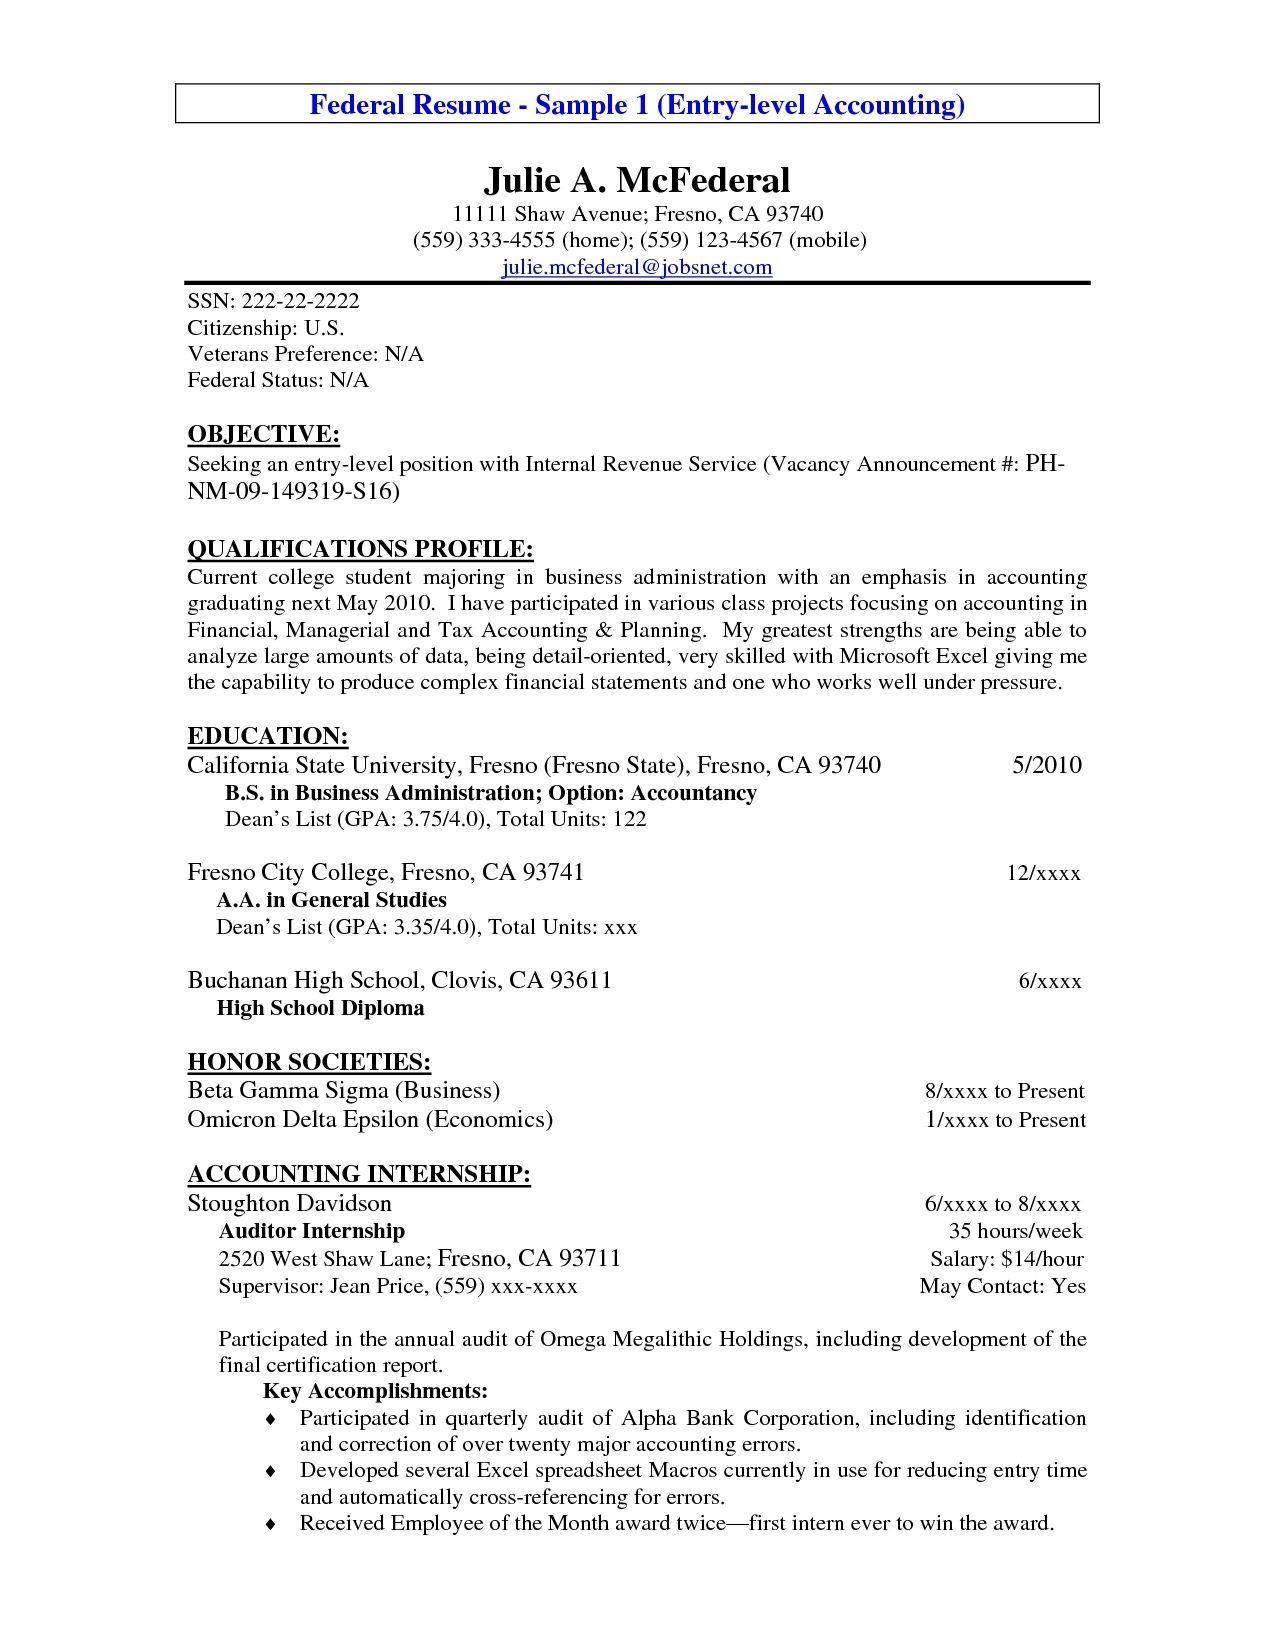 resume objective examples for internship